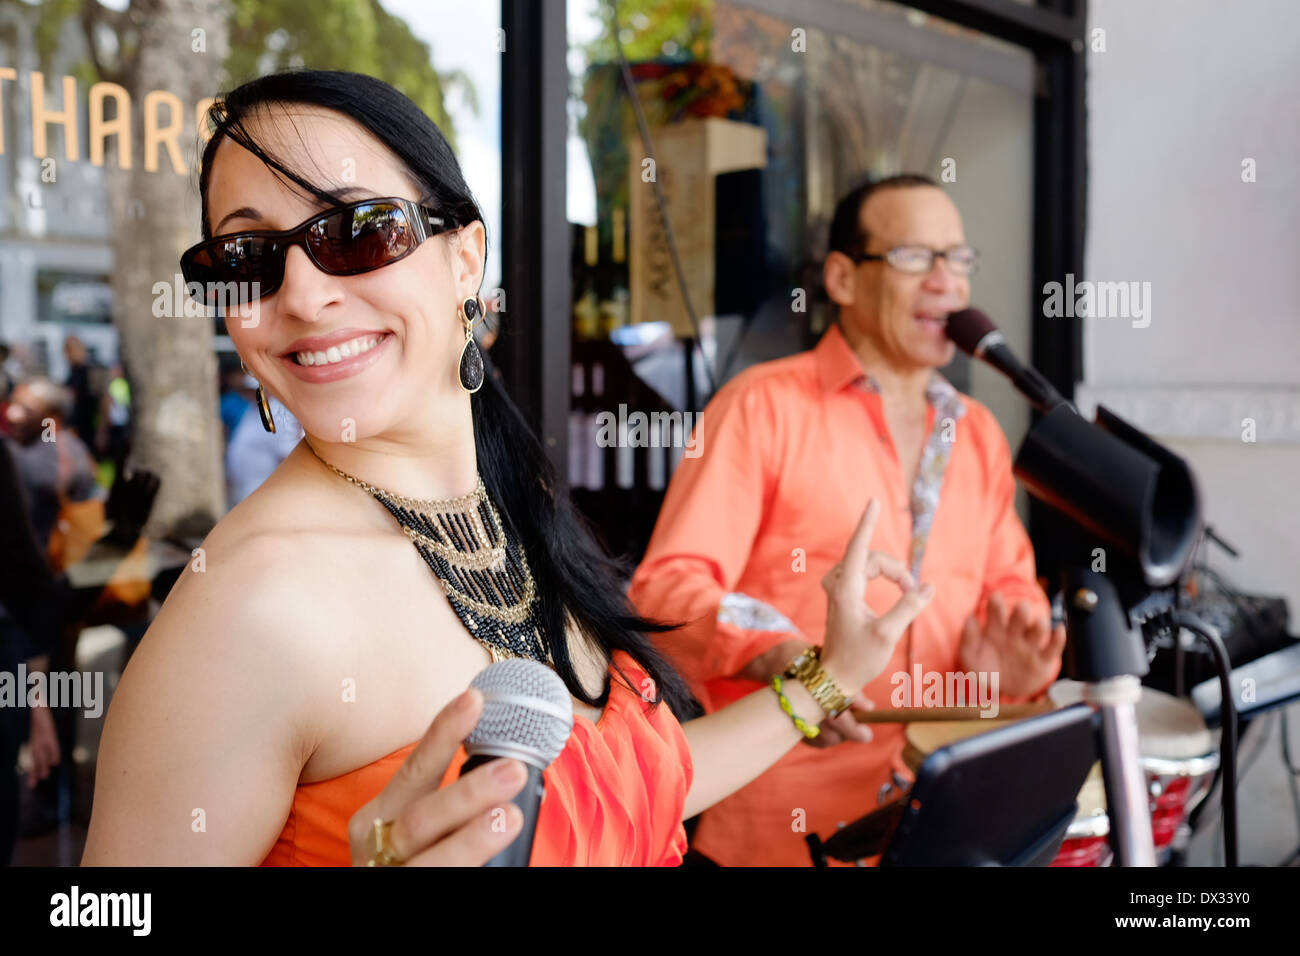 Miami March 9 2014 Portrait Of Woman Singing And Dancing During The 37th Calle Ocho Festival 